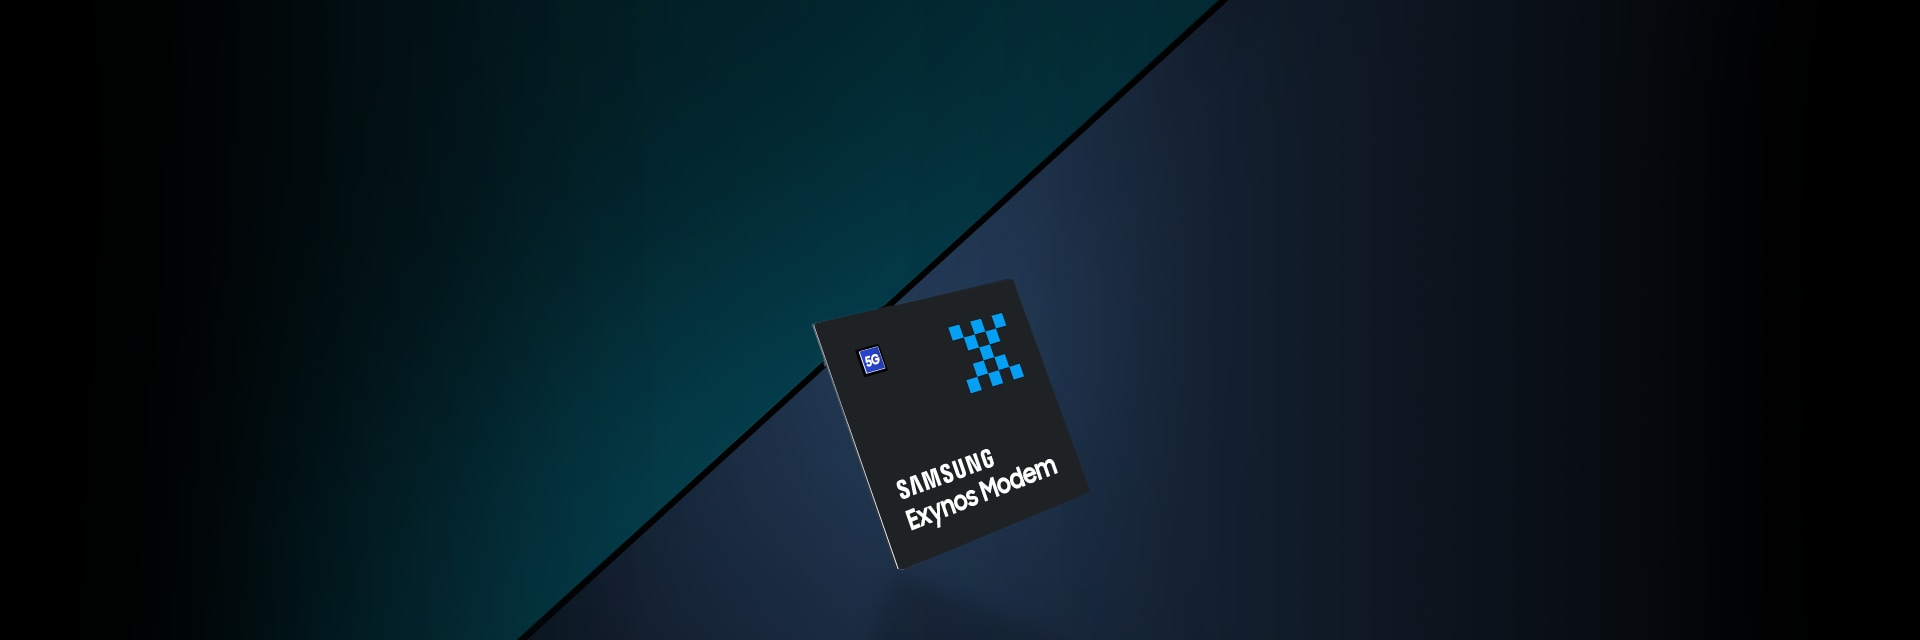 Samsung Semiconductor Processor, Exynos Modem, Tailored for the 5G Era